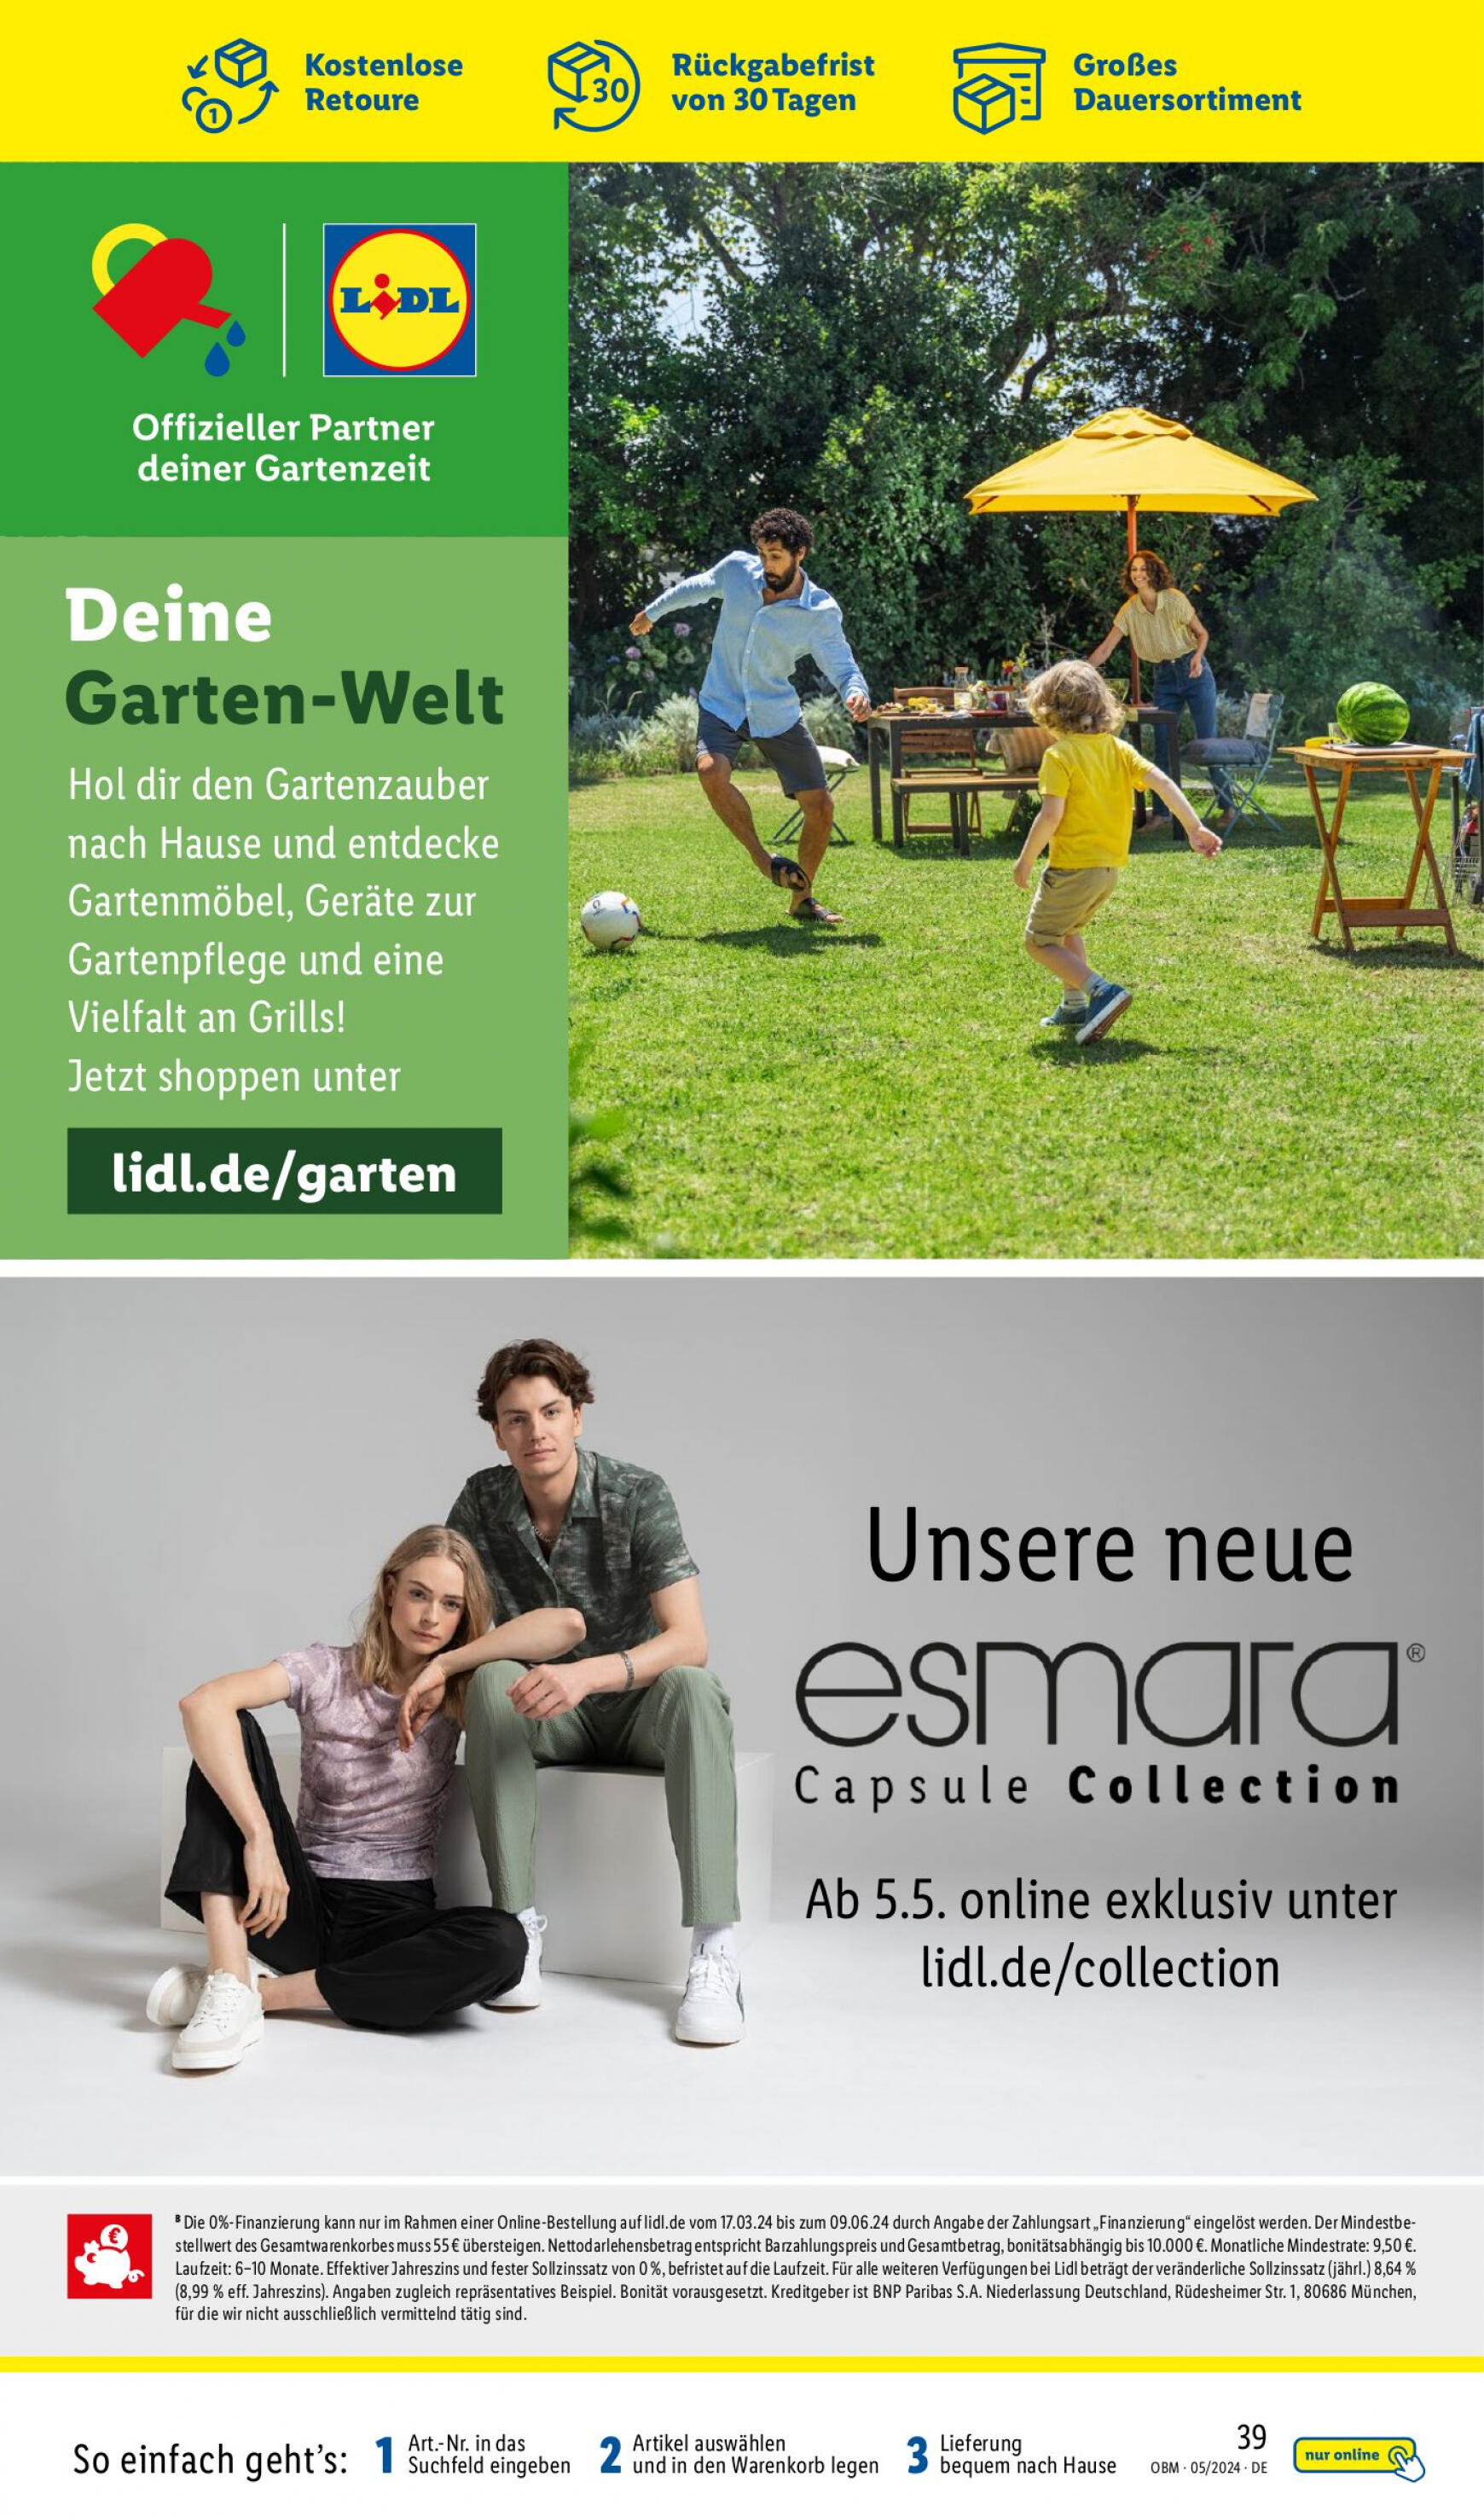 lidl - Flyer Lidl - Aktuelle Onlineshop-Highlights aktuell 01.05. - 31.05. - page: 39